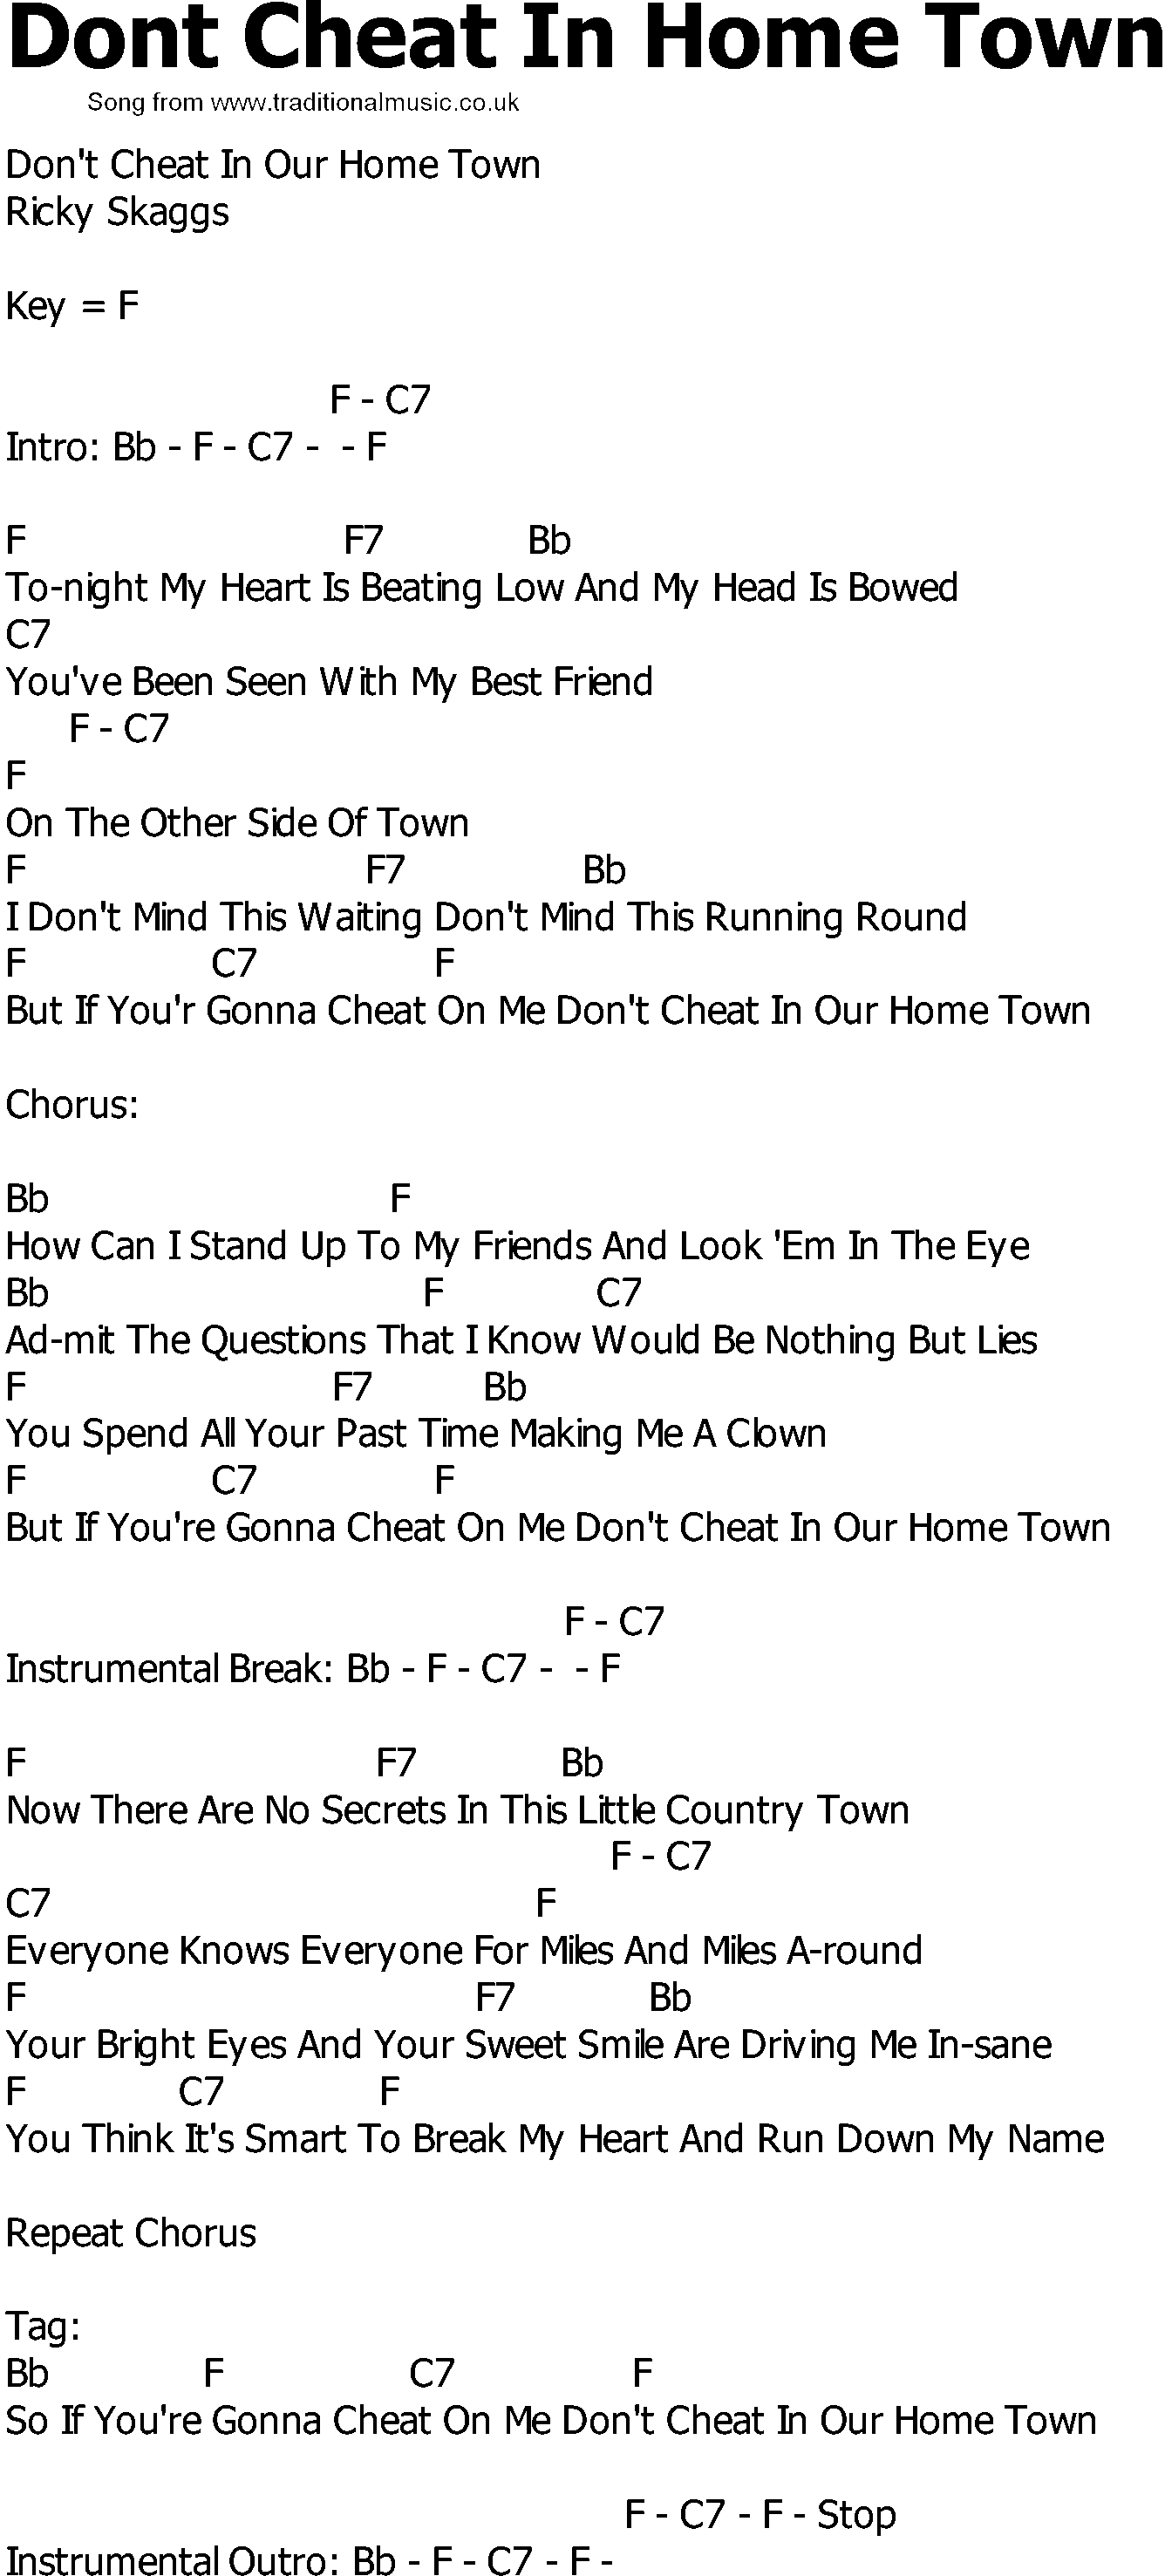 Old Country song lyrics with chords - Dont Cheat In Home Town